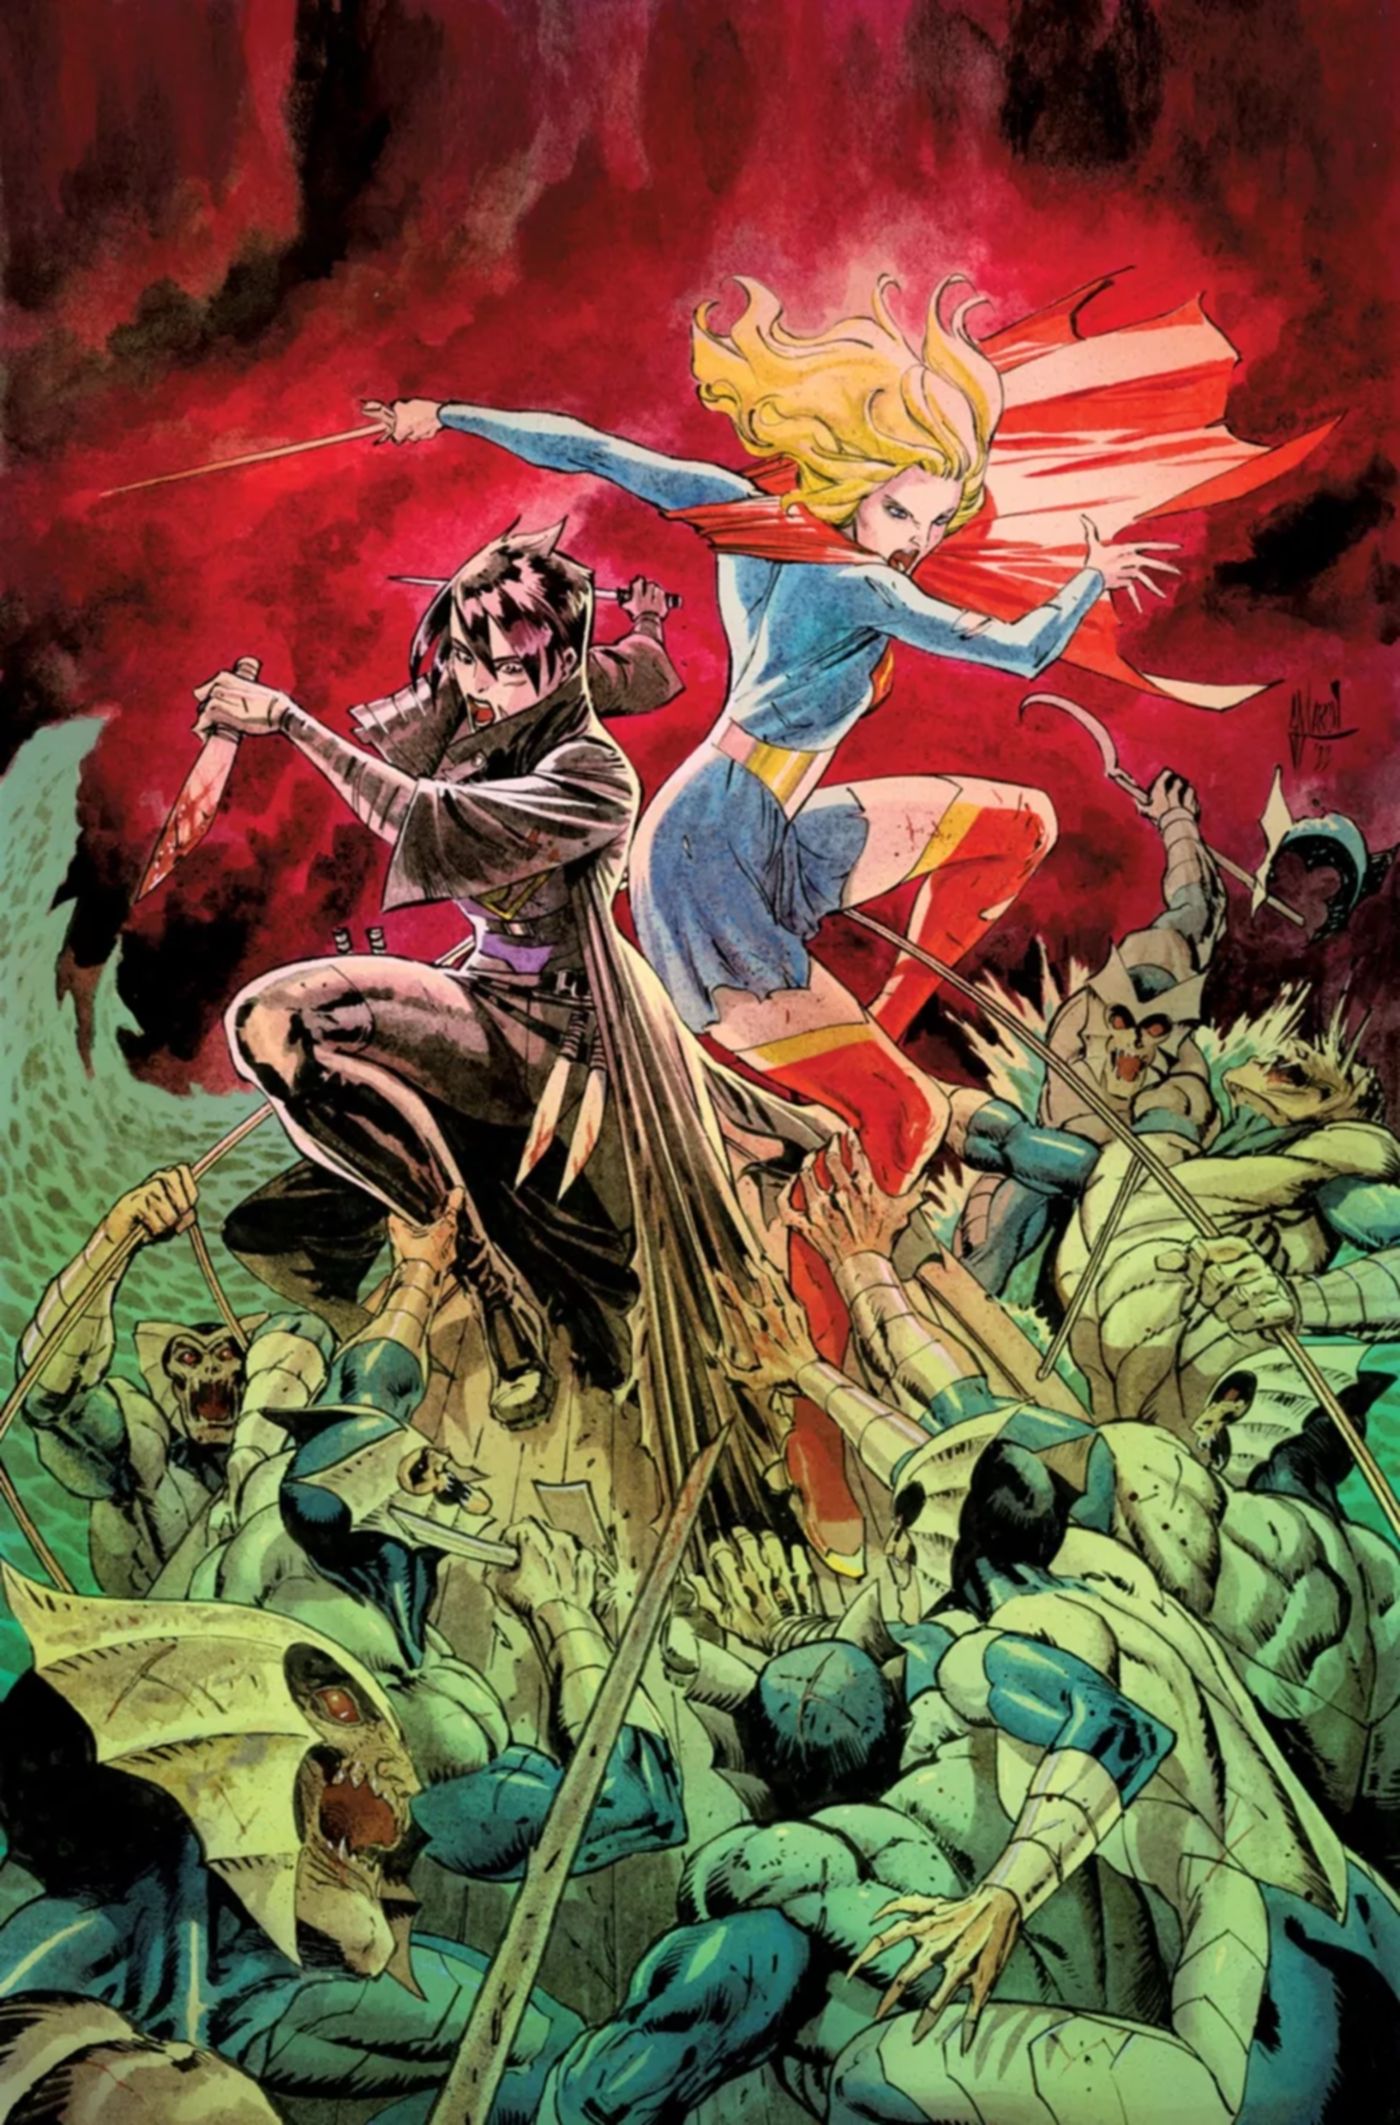 Supergirl Wields a Gory New Weapon in DC’s Horror Apocalypse